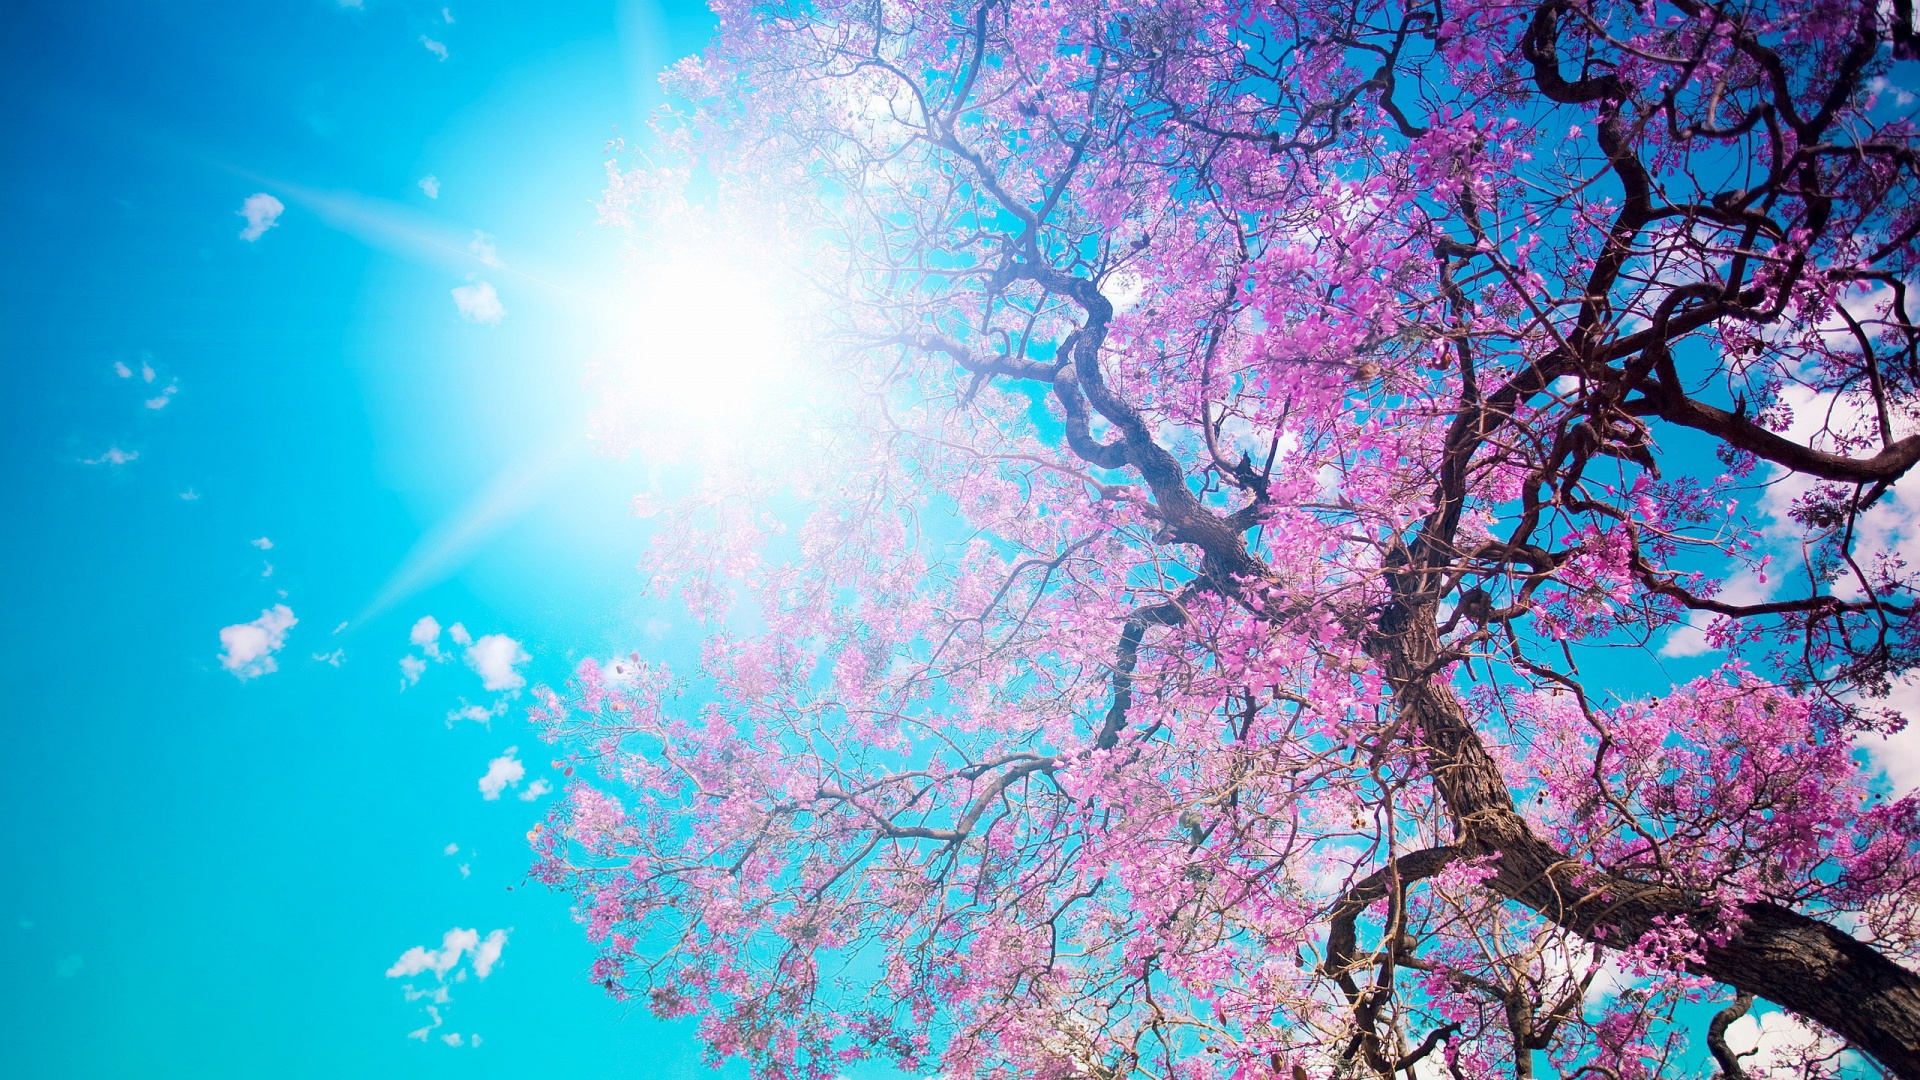 Spring Wallpapers 418 HDWPro